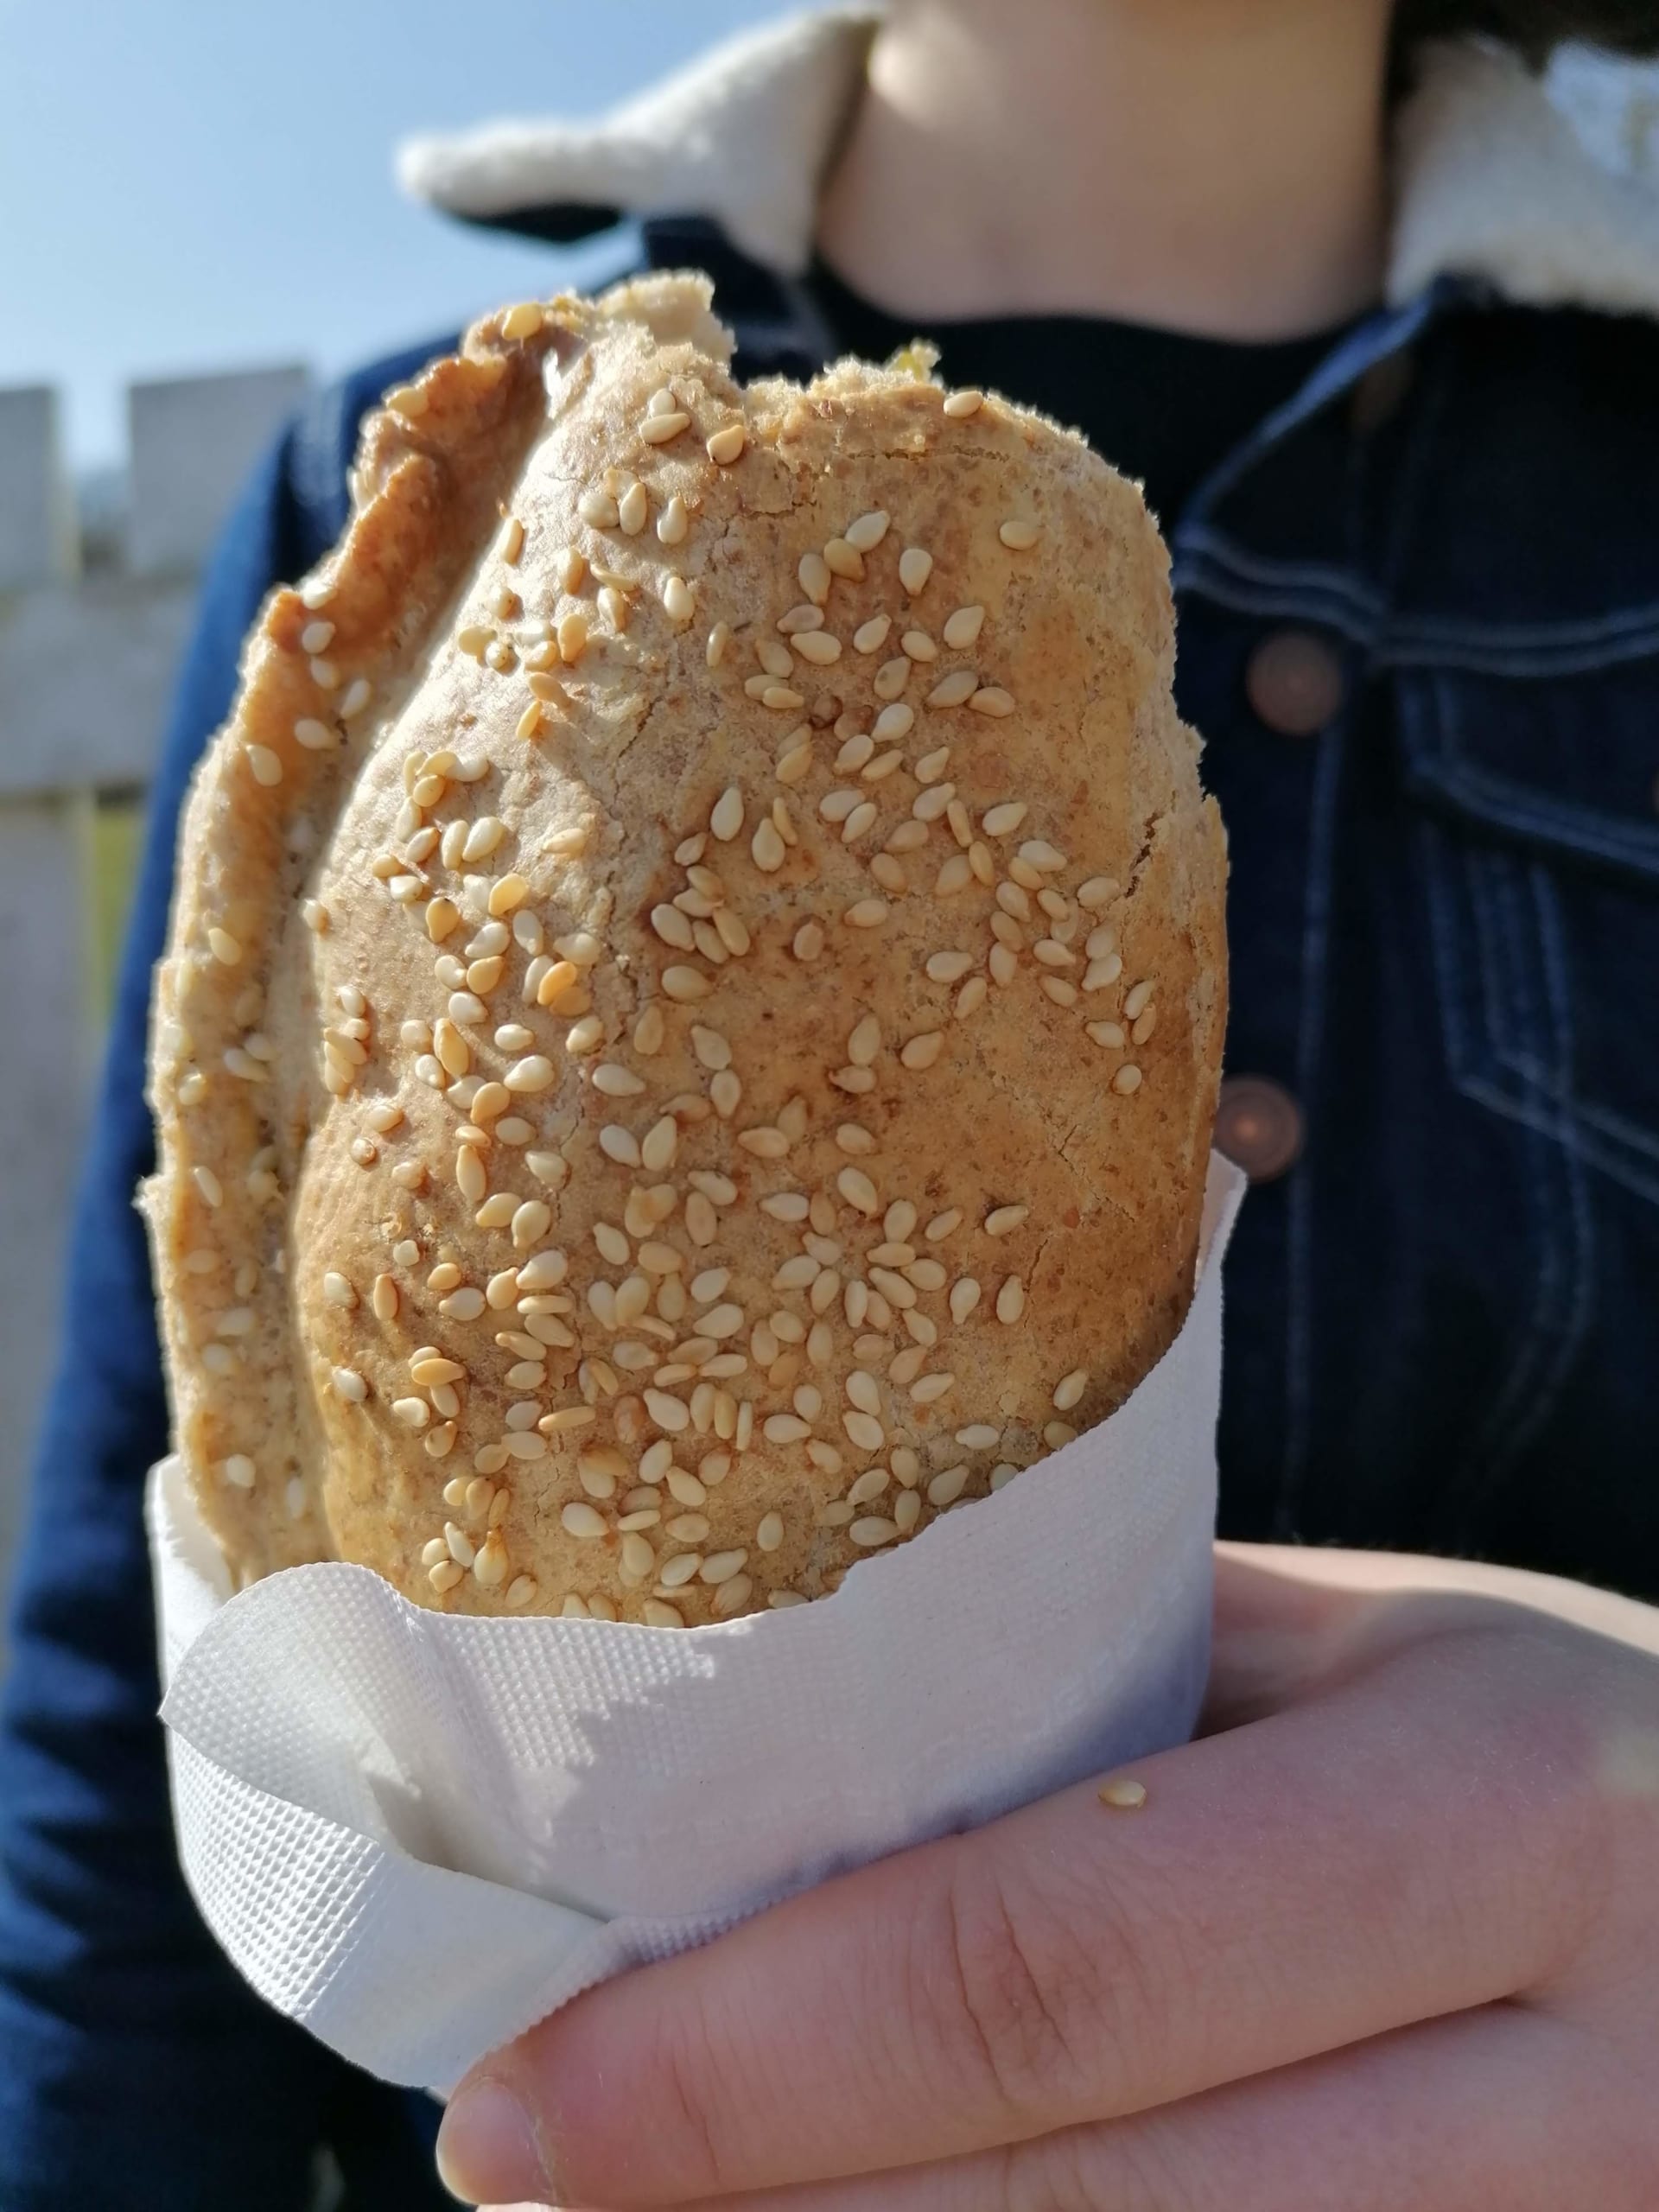 An image of a pasty being eaten on a picnic